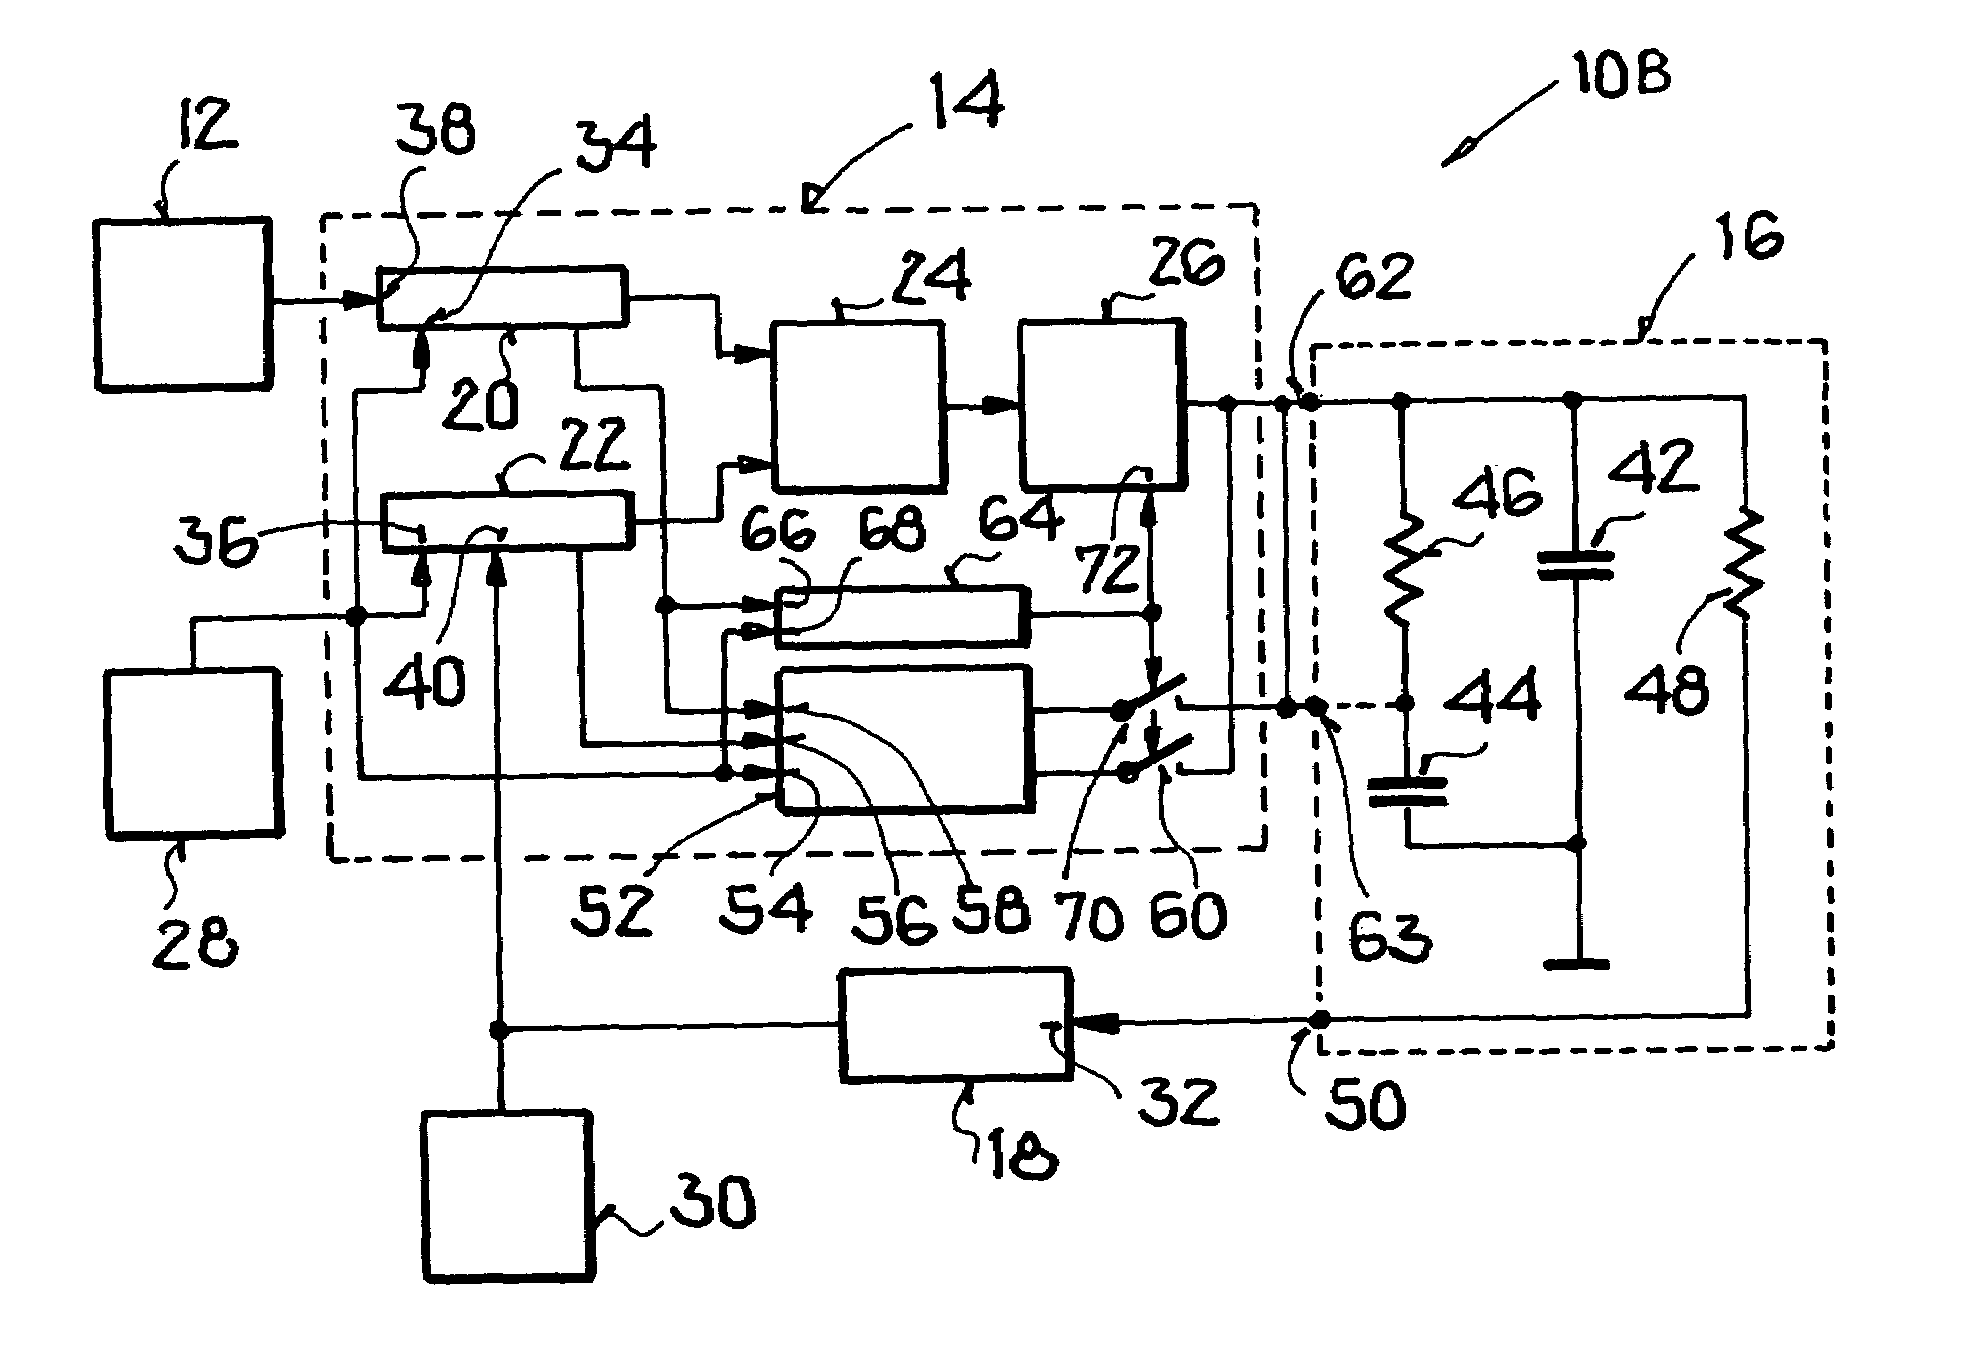 Circuit and method for faster frequency switching in a phase locked loop